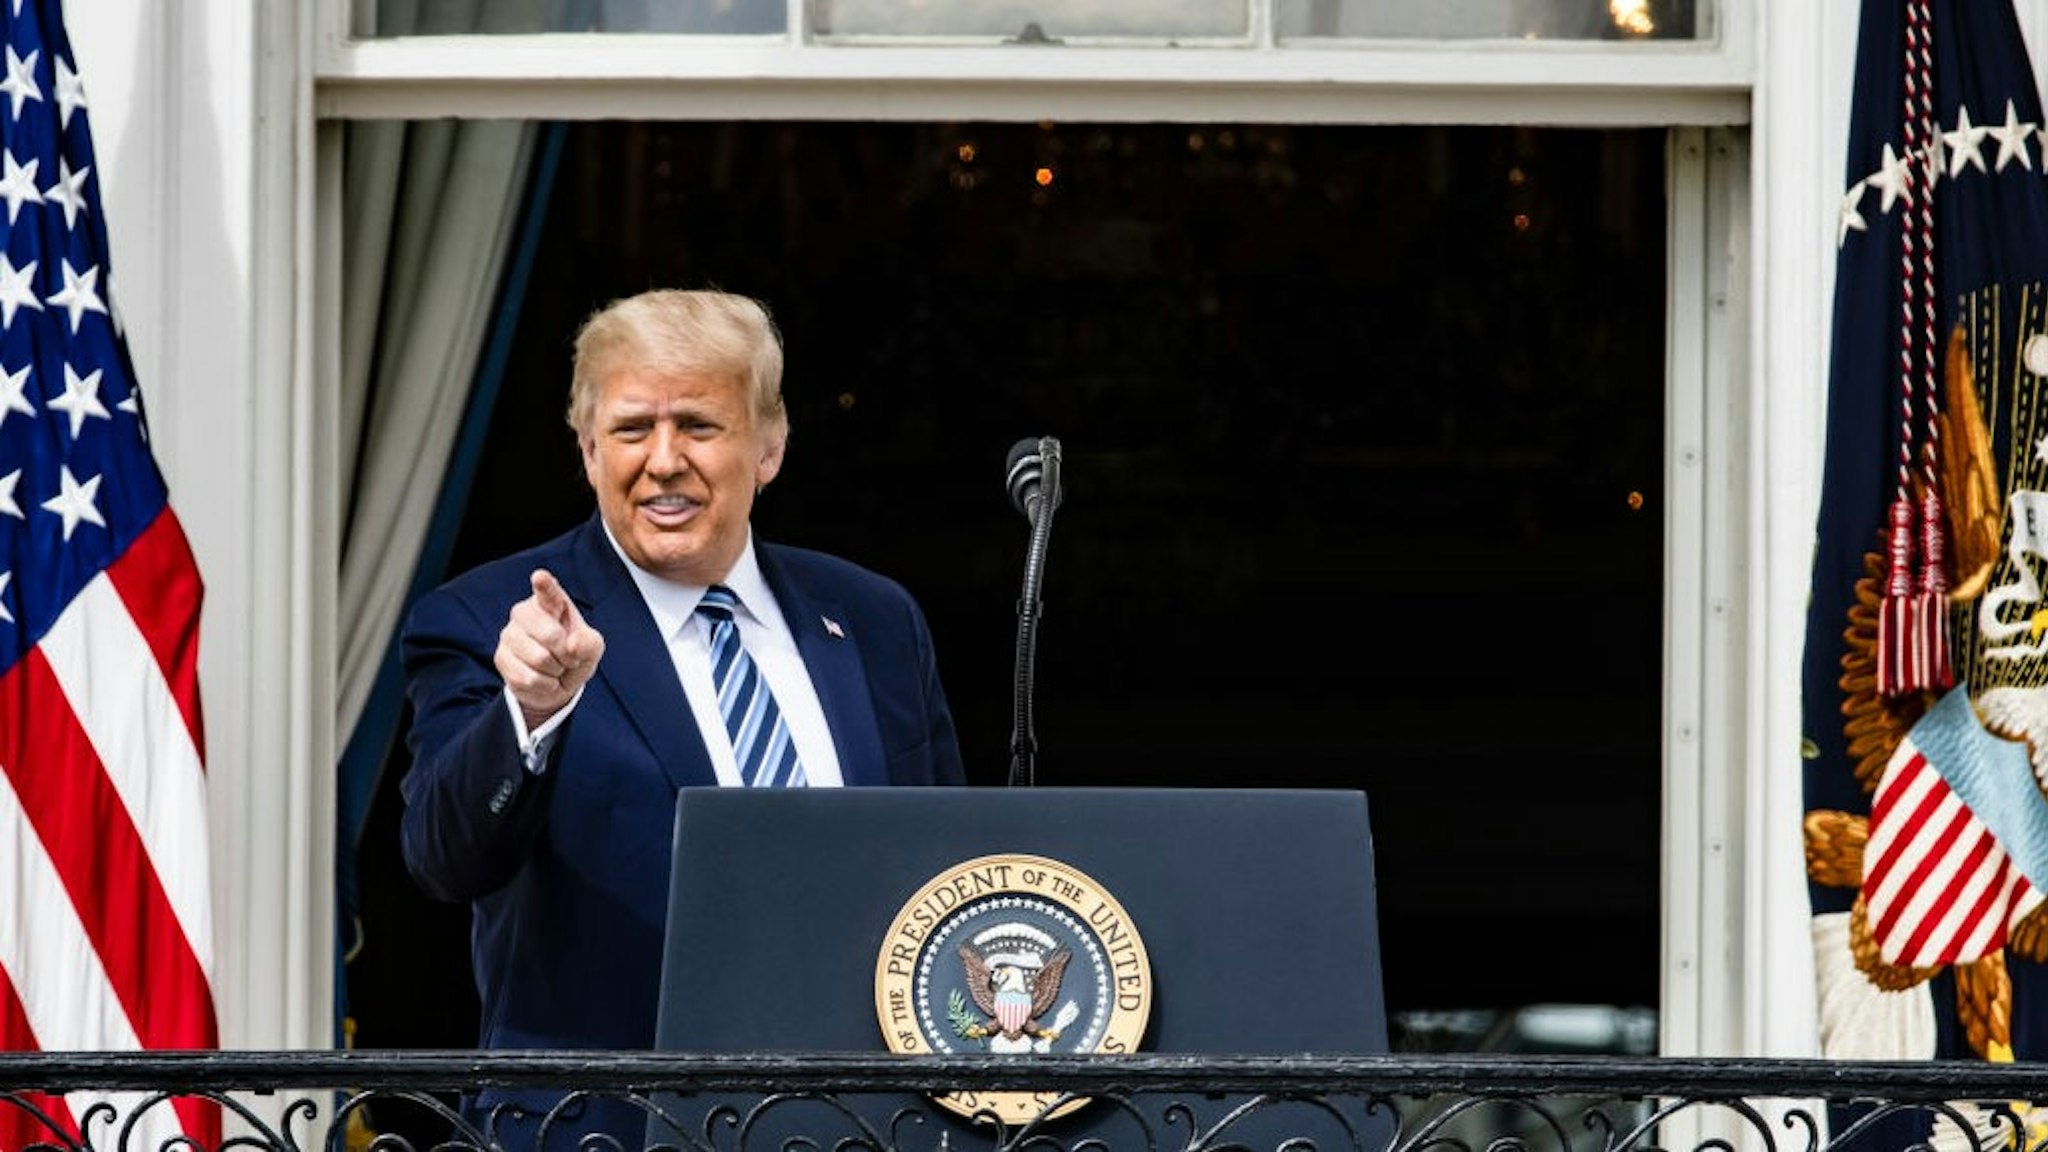 WASHINGTON, DC - OCTOBER 10: U.S. President Donald Trump addresses a rally in support of law and order on the South Lawn of the White House on October 10, 2020 in Washington, DC. PresidentTrump invited over two thousand guests to hear him speak just a week after he was hospitalized for COVID-19. (Photo by